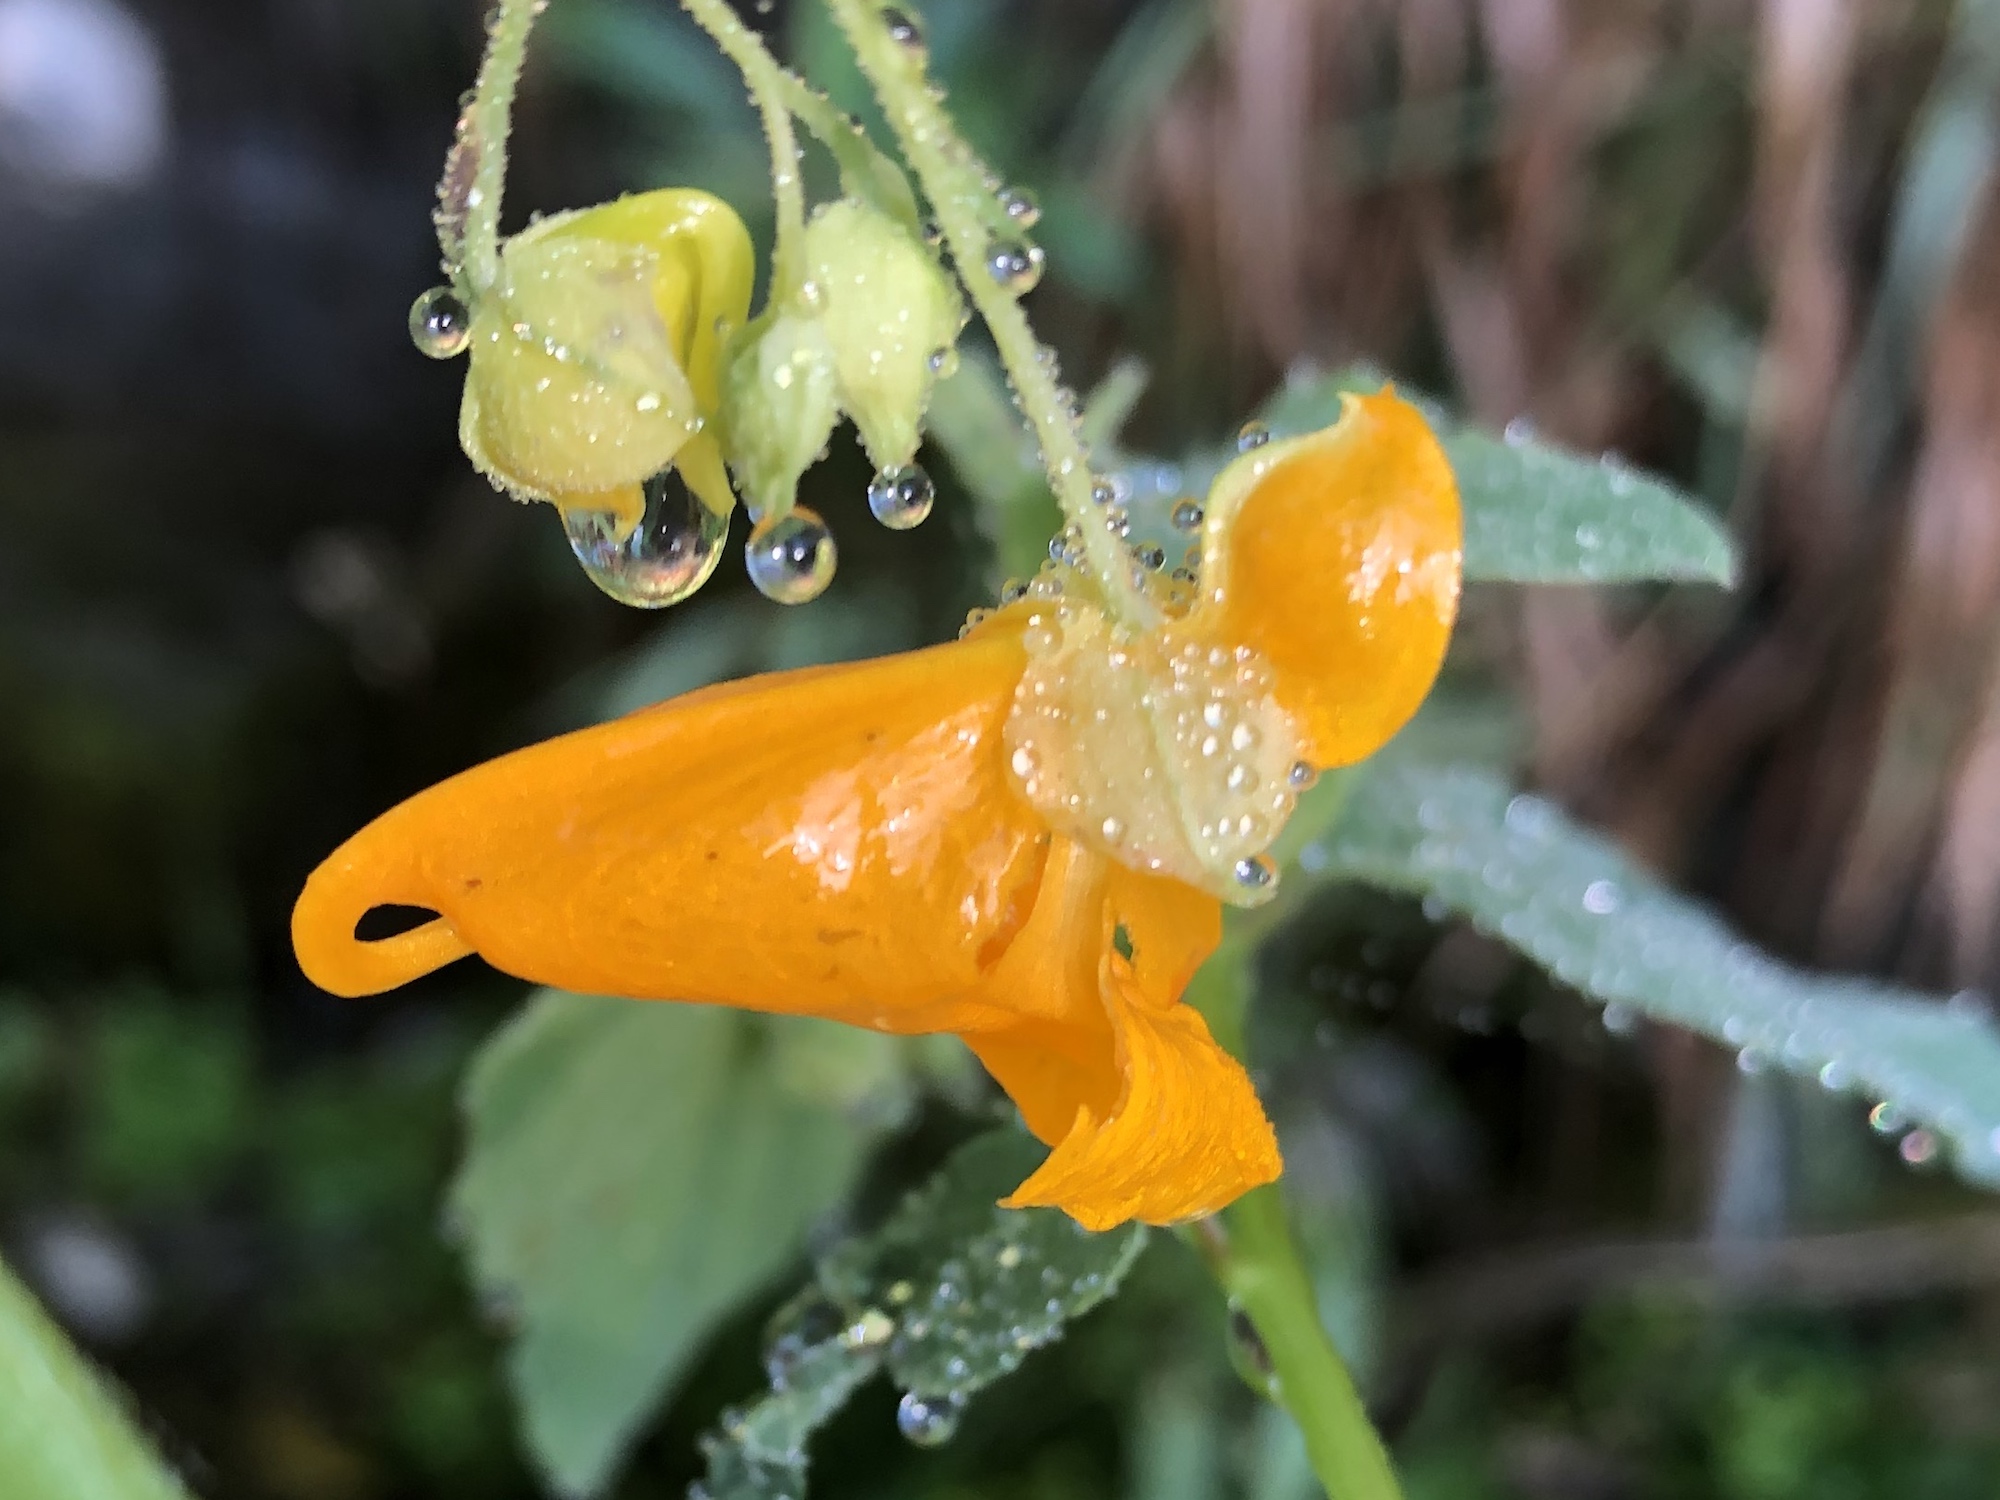 Orange Jewelweed by source of Duck Pond on August 11, 2020.